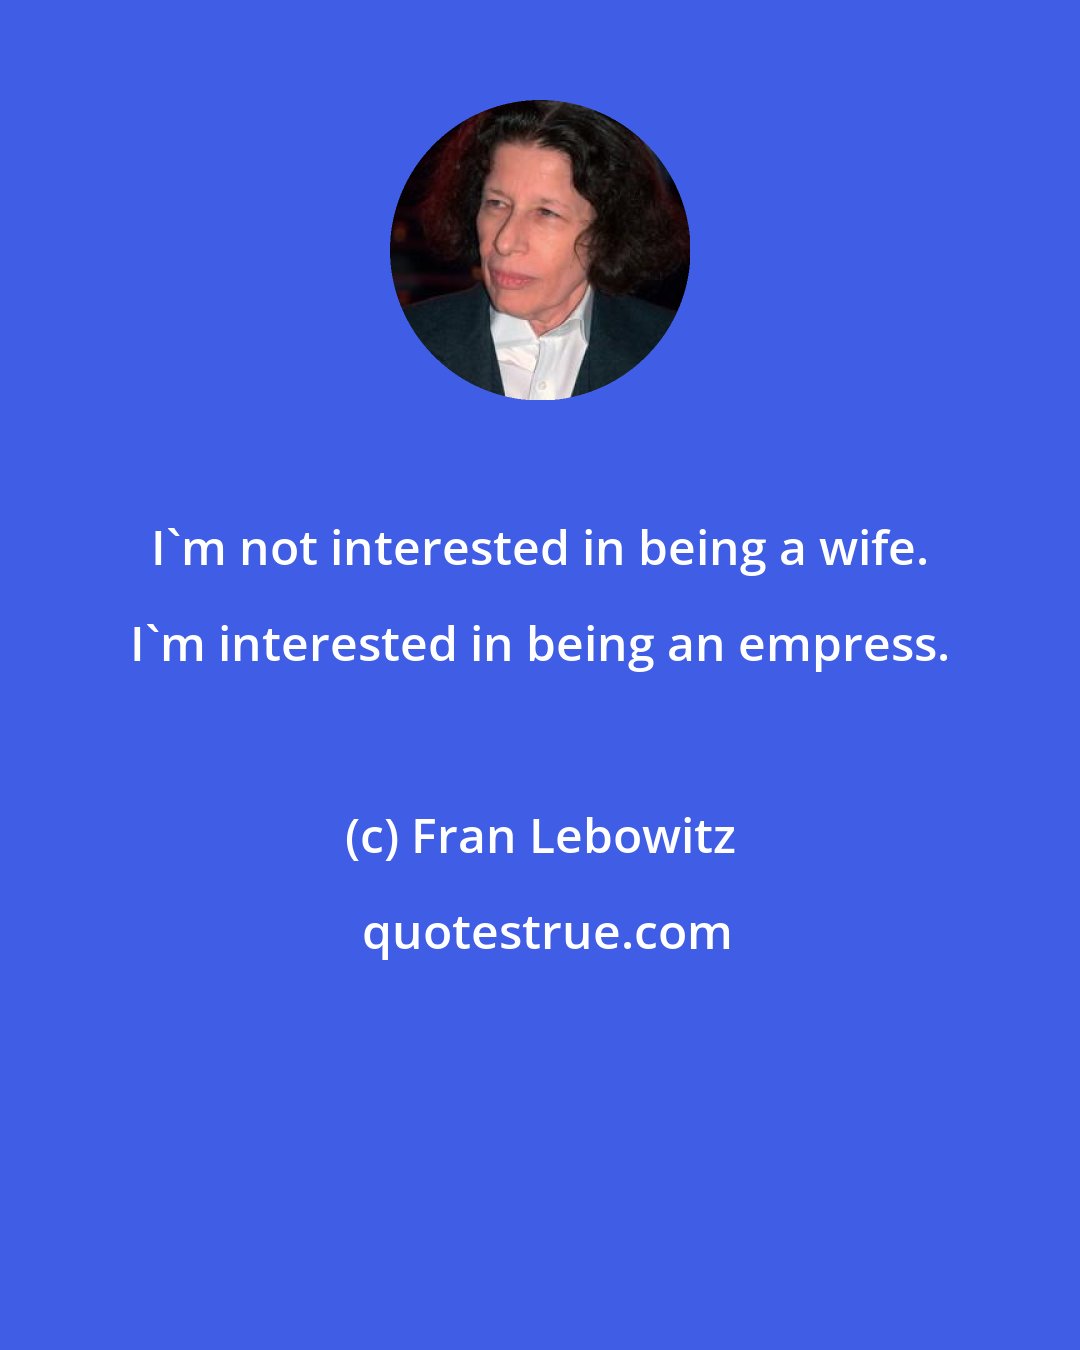 Fran Lebowitz: I'm not interested in being a wife. I'm interested in being an empress.